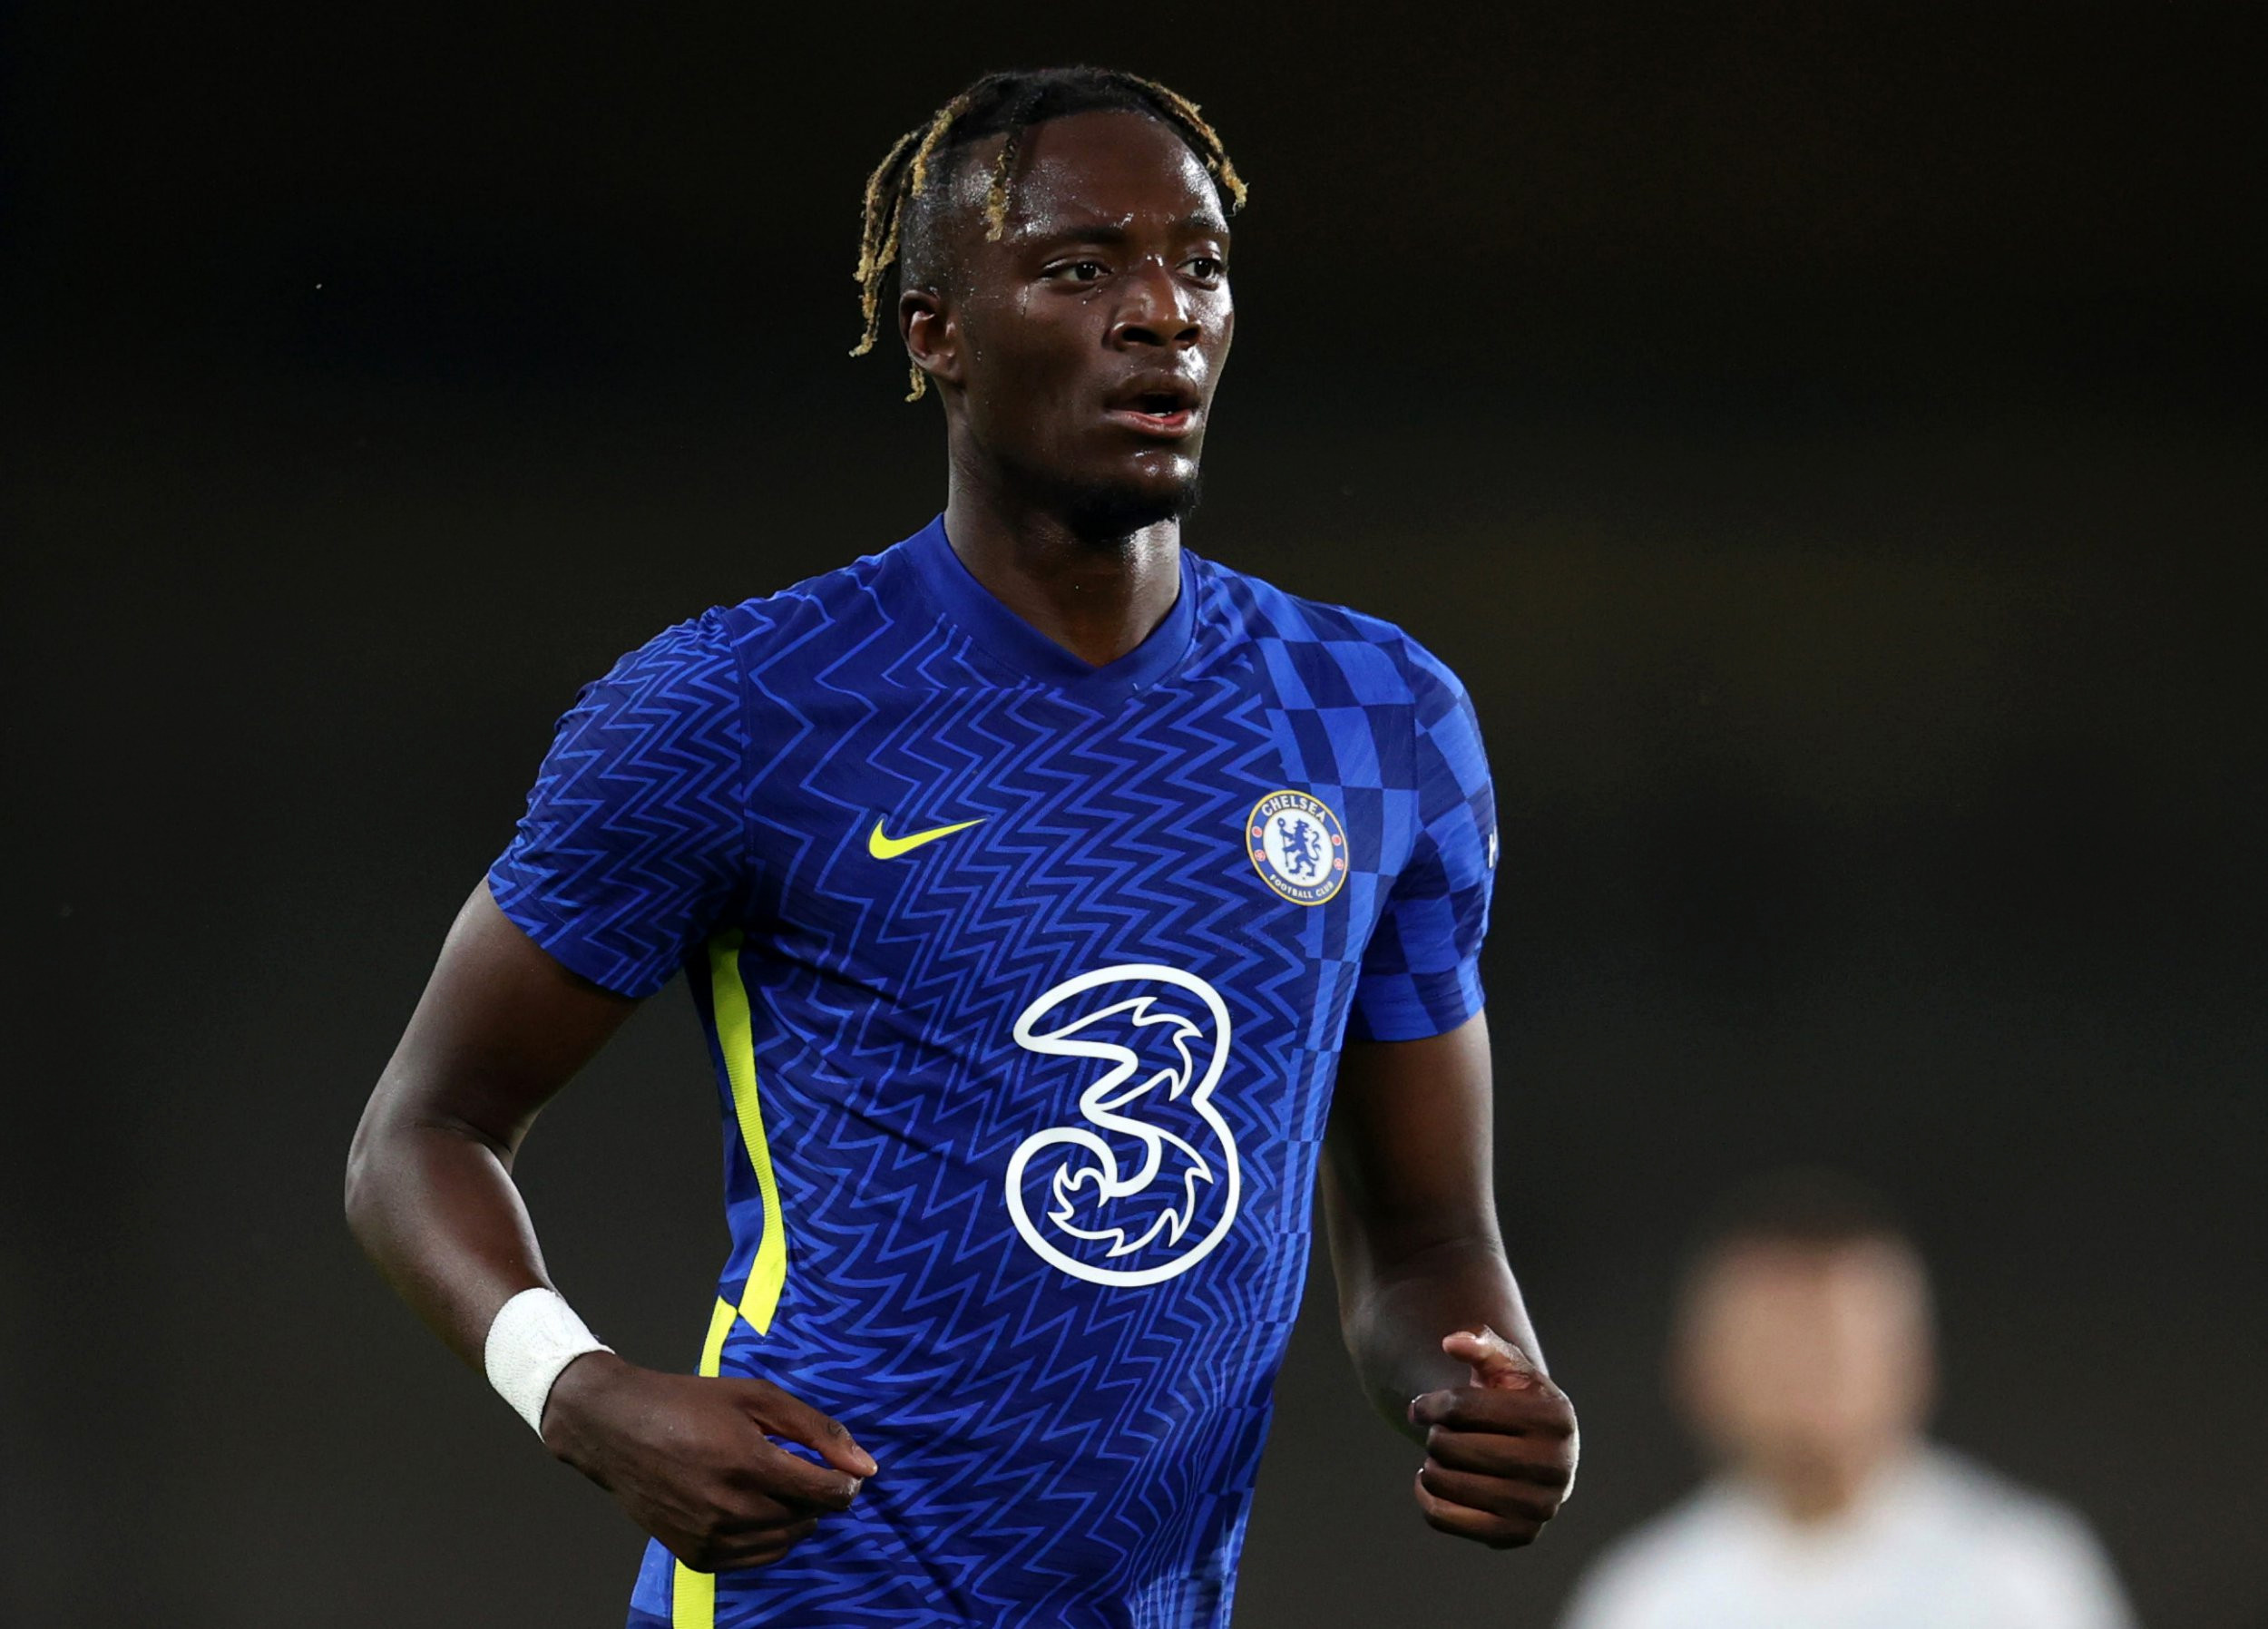 Tammy Abraham told Chelsea players he wanted to join Arsenal before Roma transfer